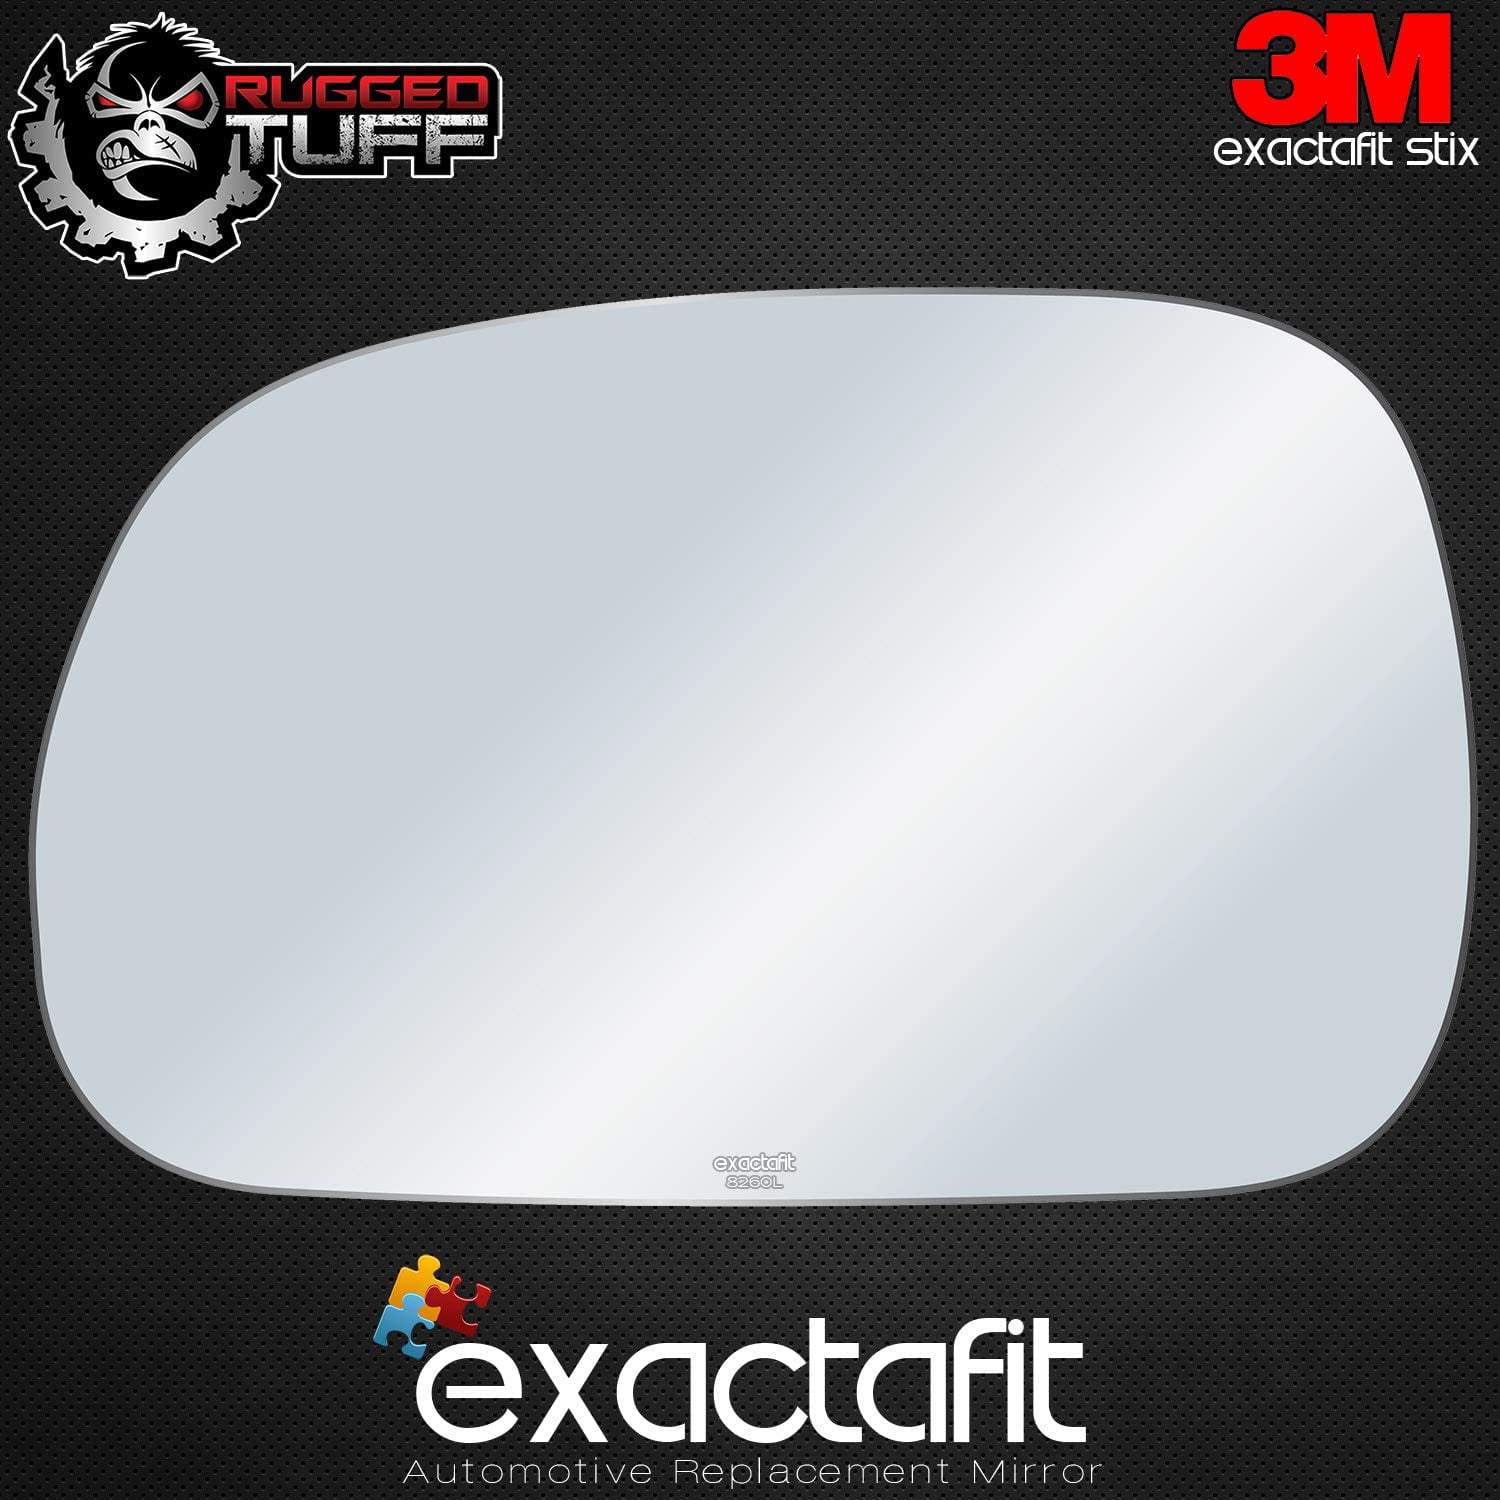 exactafit 8260L Driver Left Side Mirror Glass Replacement fits 1996-2002 BMW Z3 by Rugged TUFF 